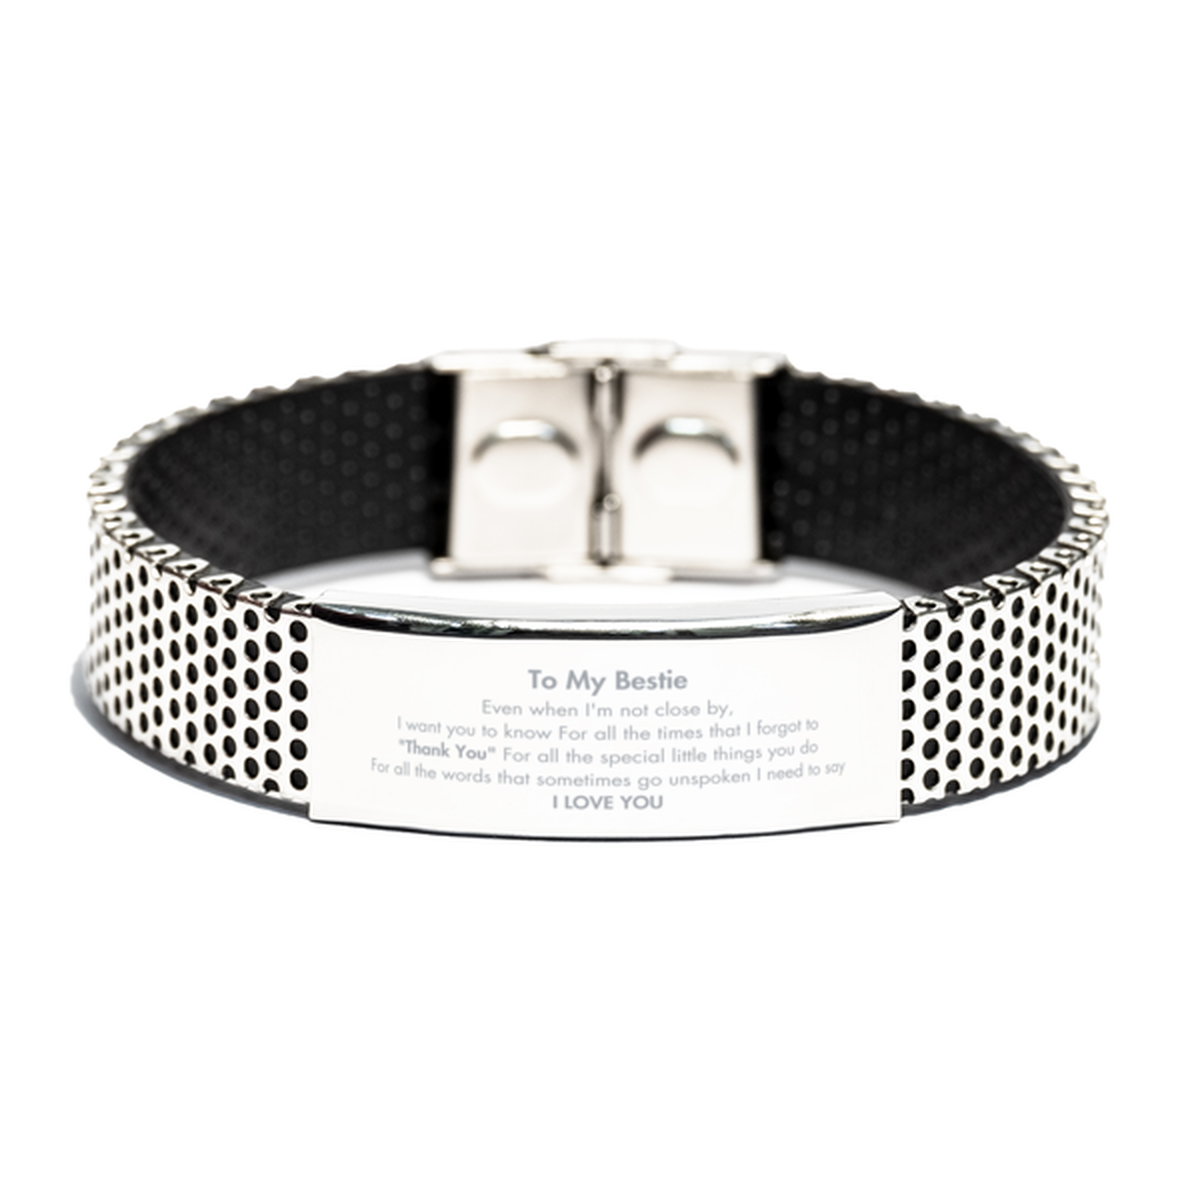 Thank You Gifts for Bestie, Keepsake Stainless Steel Bracelet Gifts for Bestie Birthday Mother's day Father's Day Bestie For all the words That sometimes go unspoken I need to say I LOVE YOU